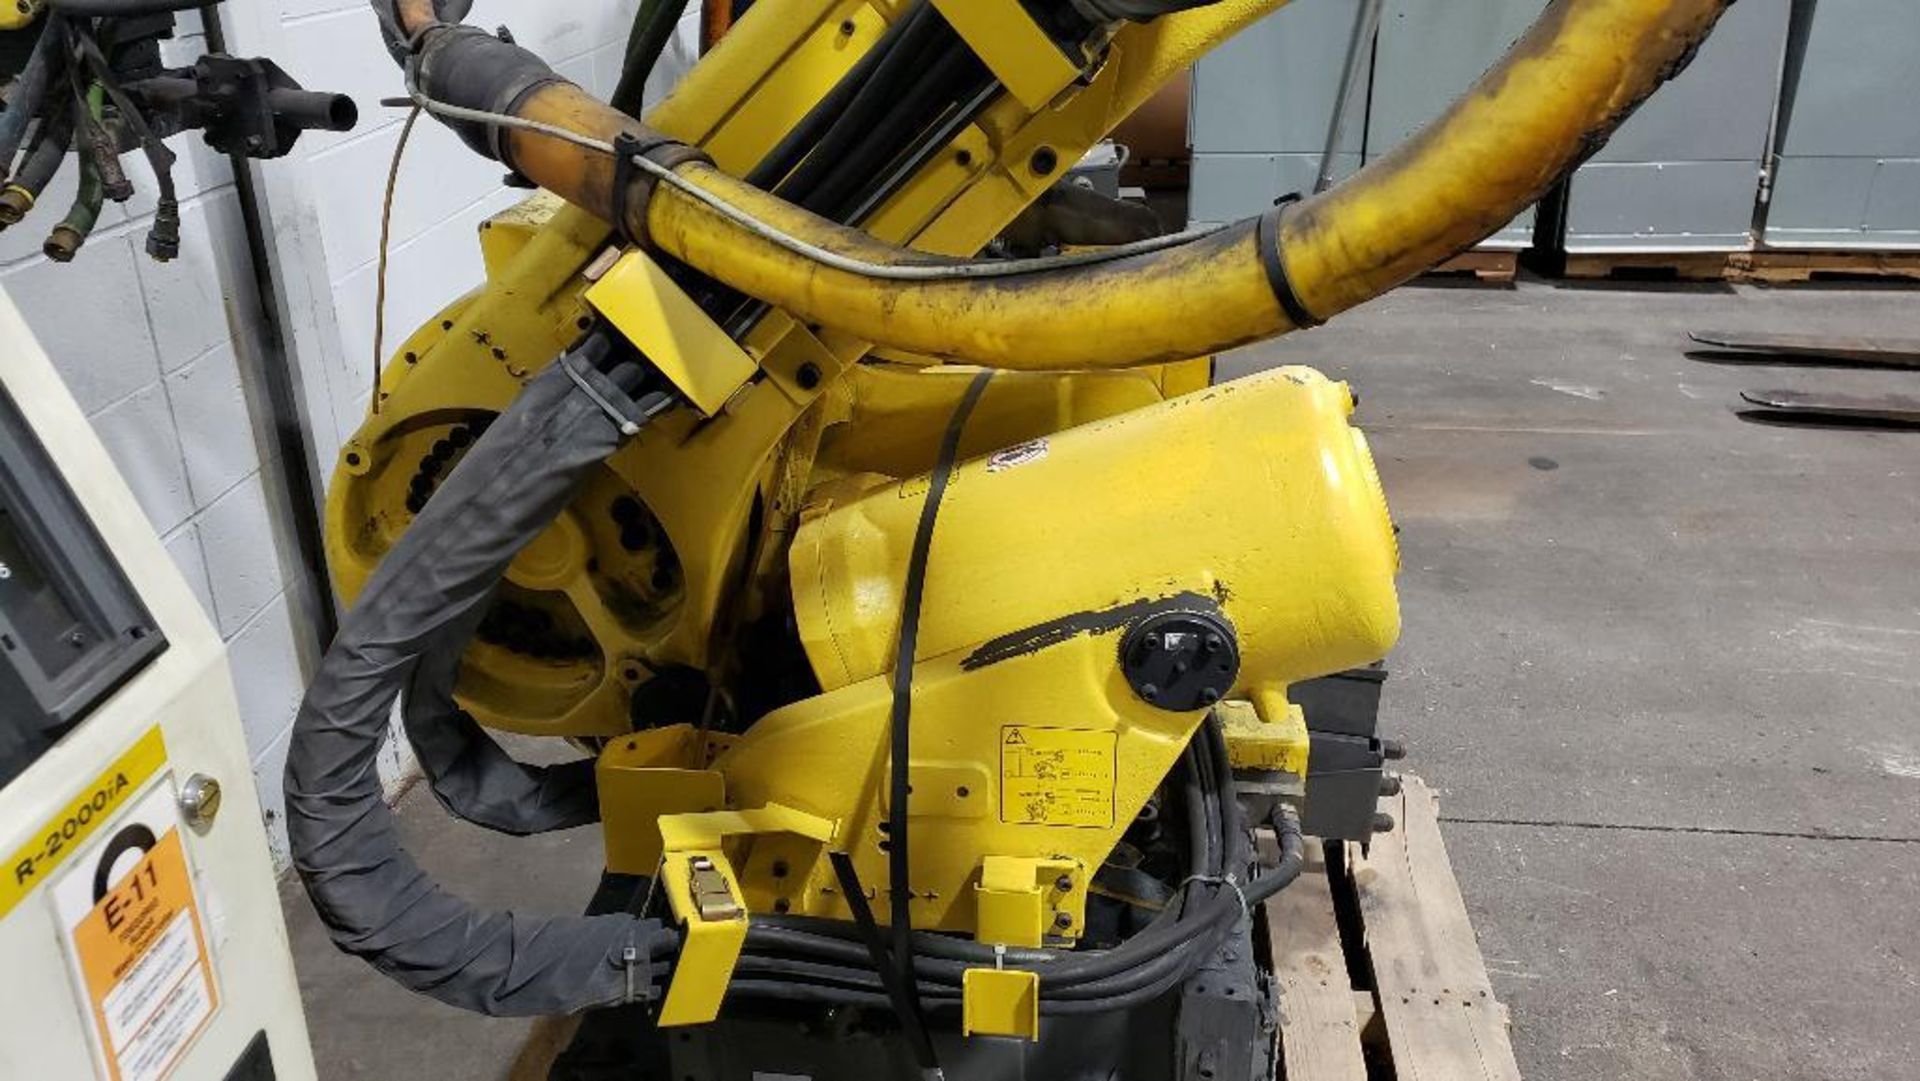 Fanuc R-2000iA/165F robot with Fanuc System R-J3iB controller. - Image 5 of 13